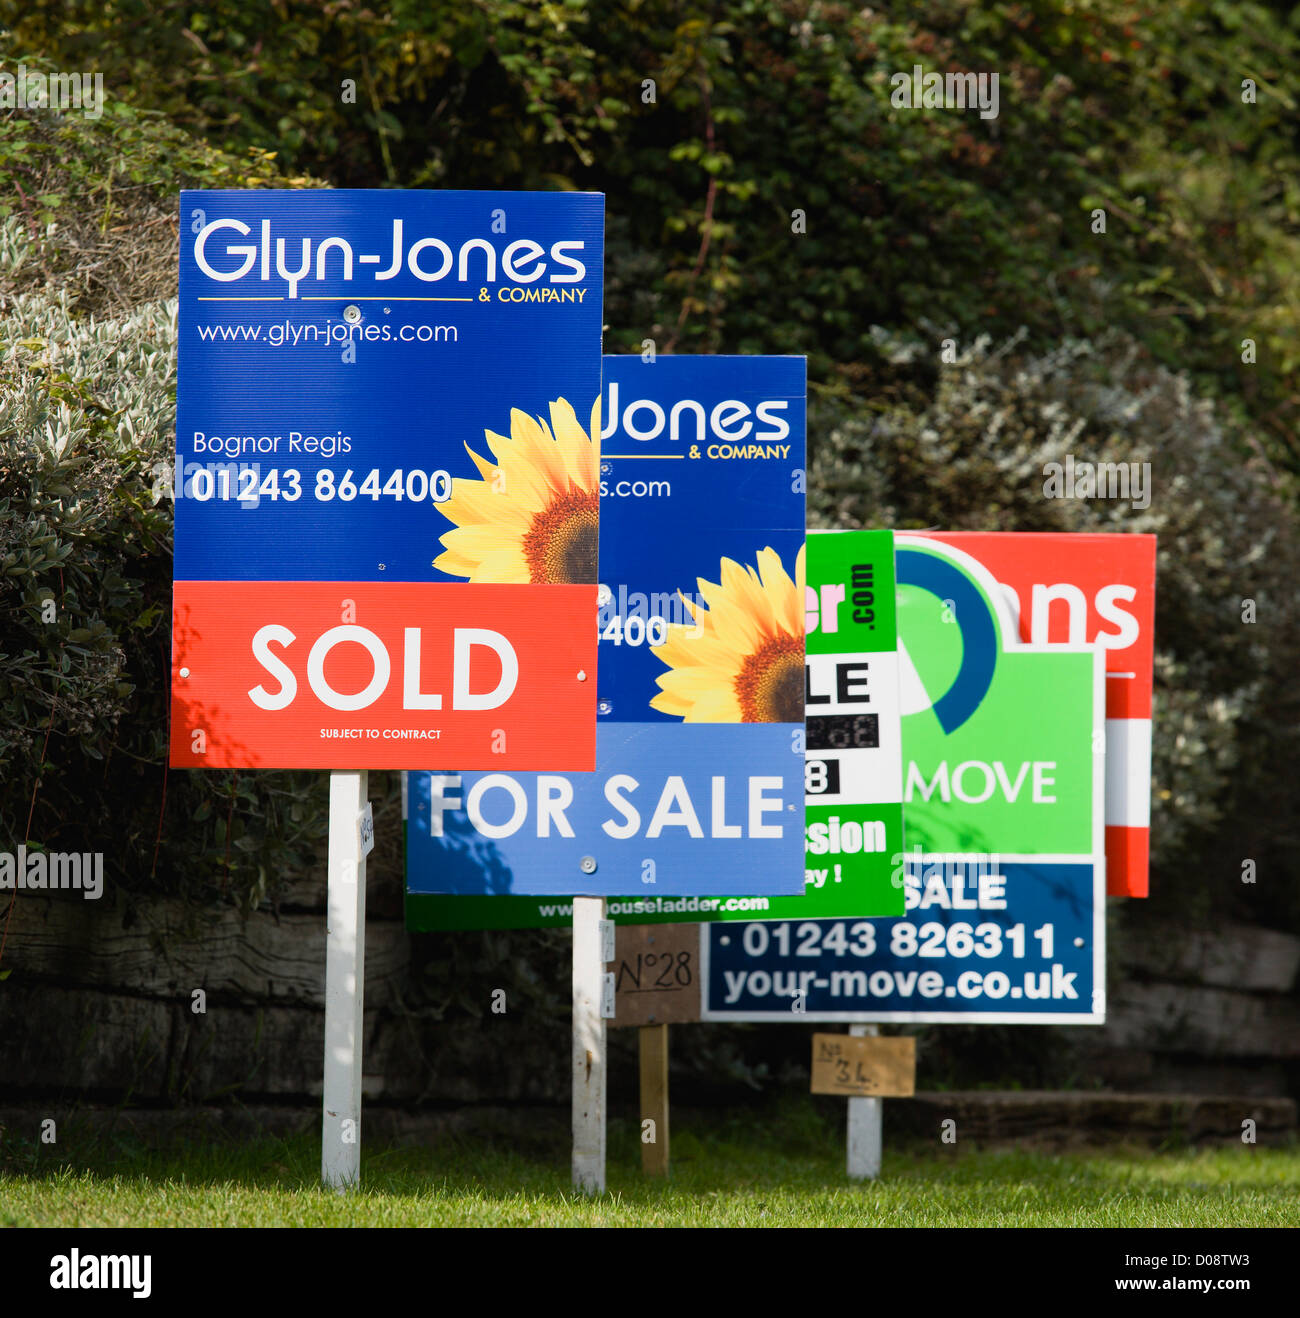 Business, Finance, Real Estate, Estate agents signs on posts advertising property for sale and sold. Stock Photo